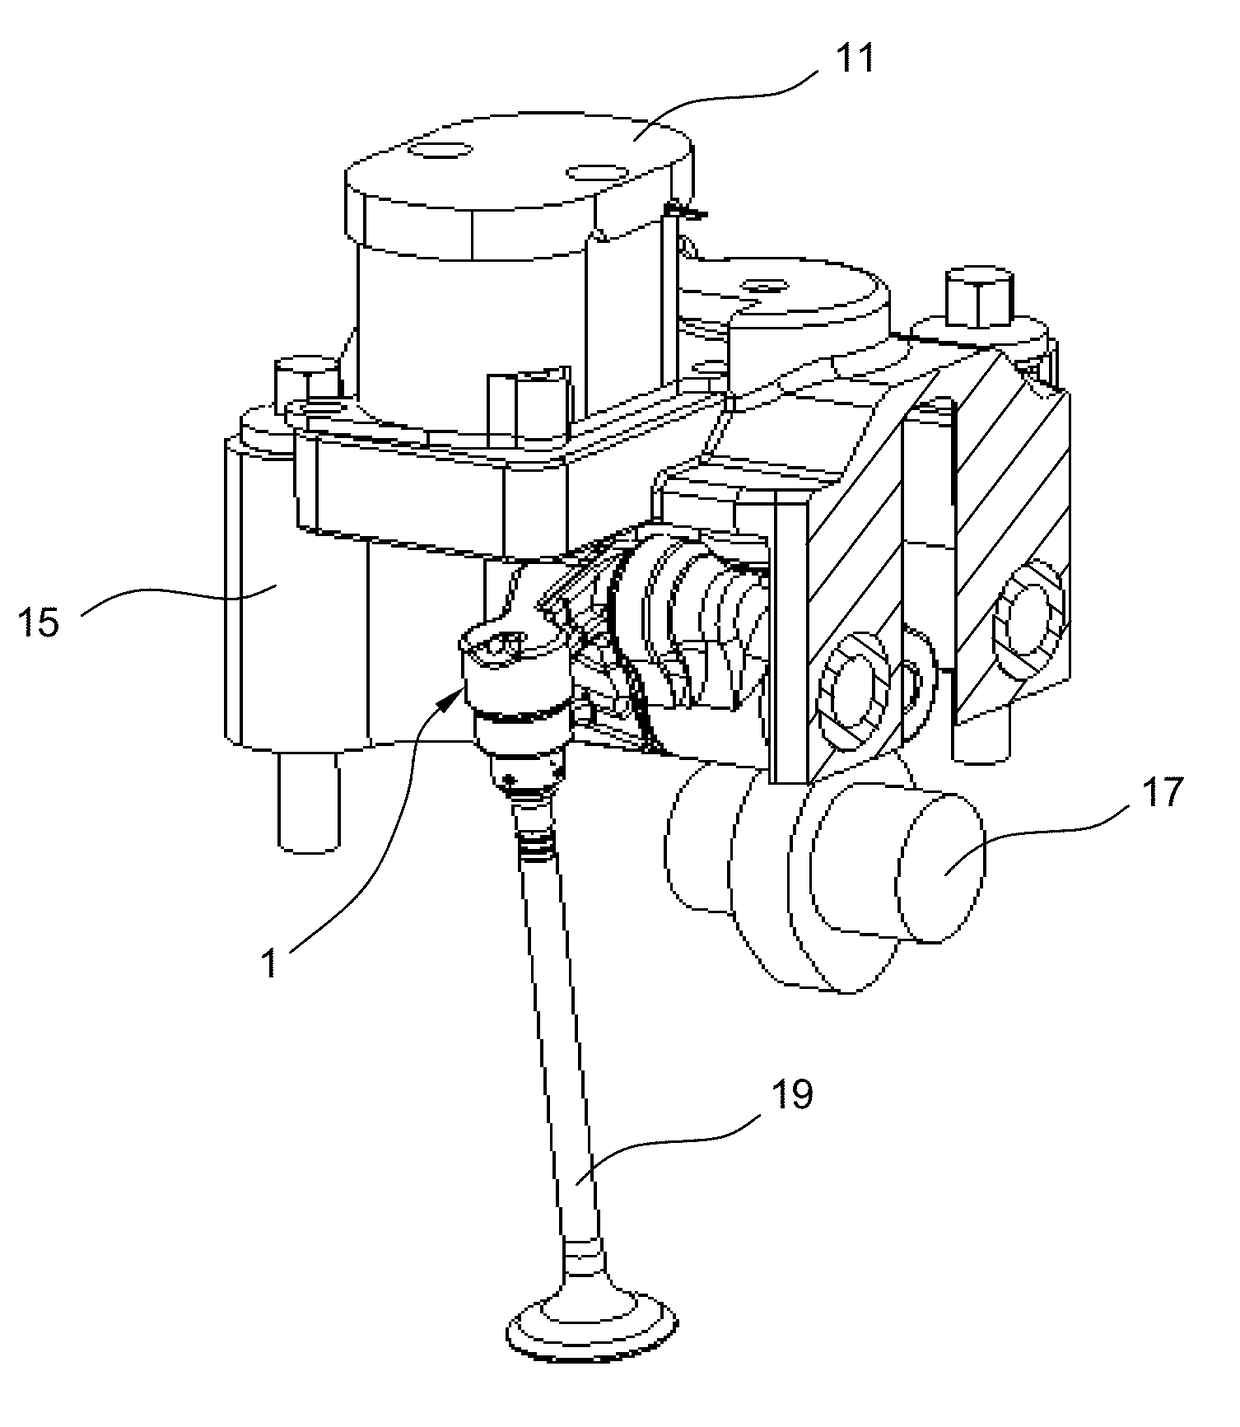 Fast acting switching valve train system for valve deactivation